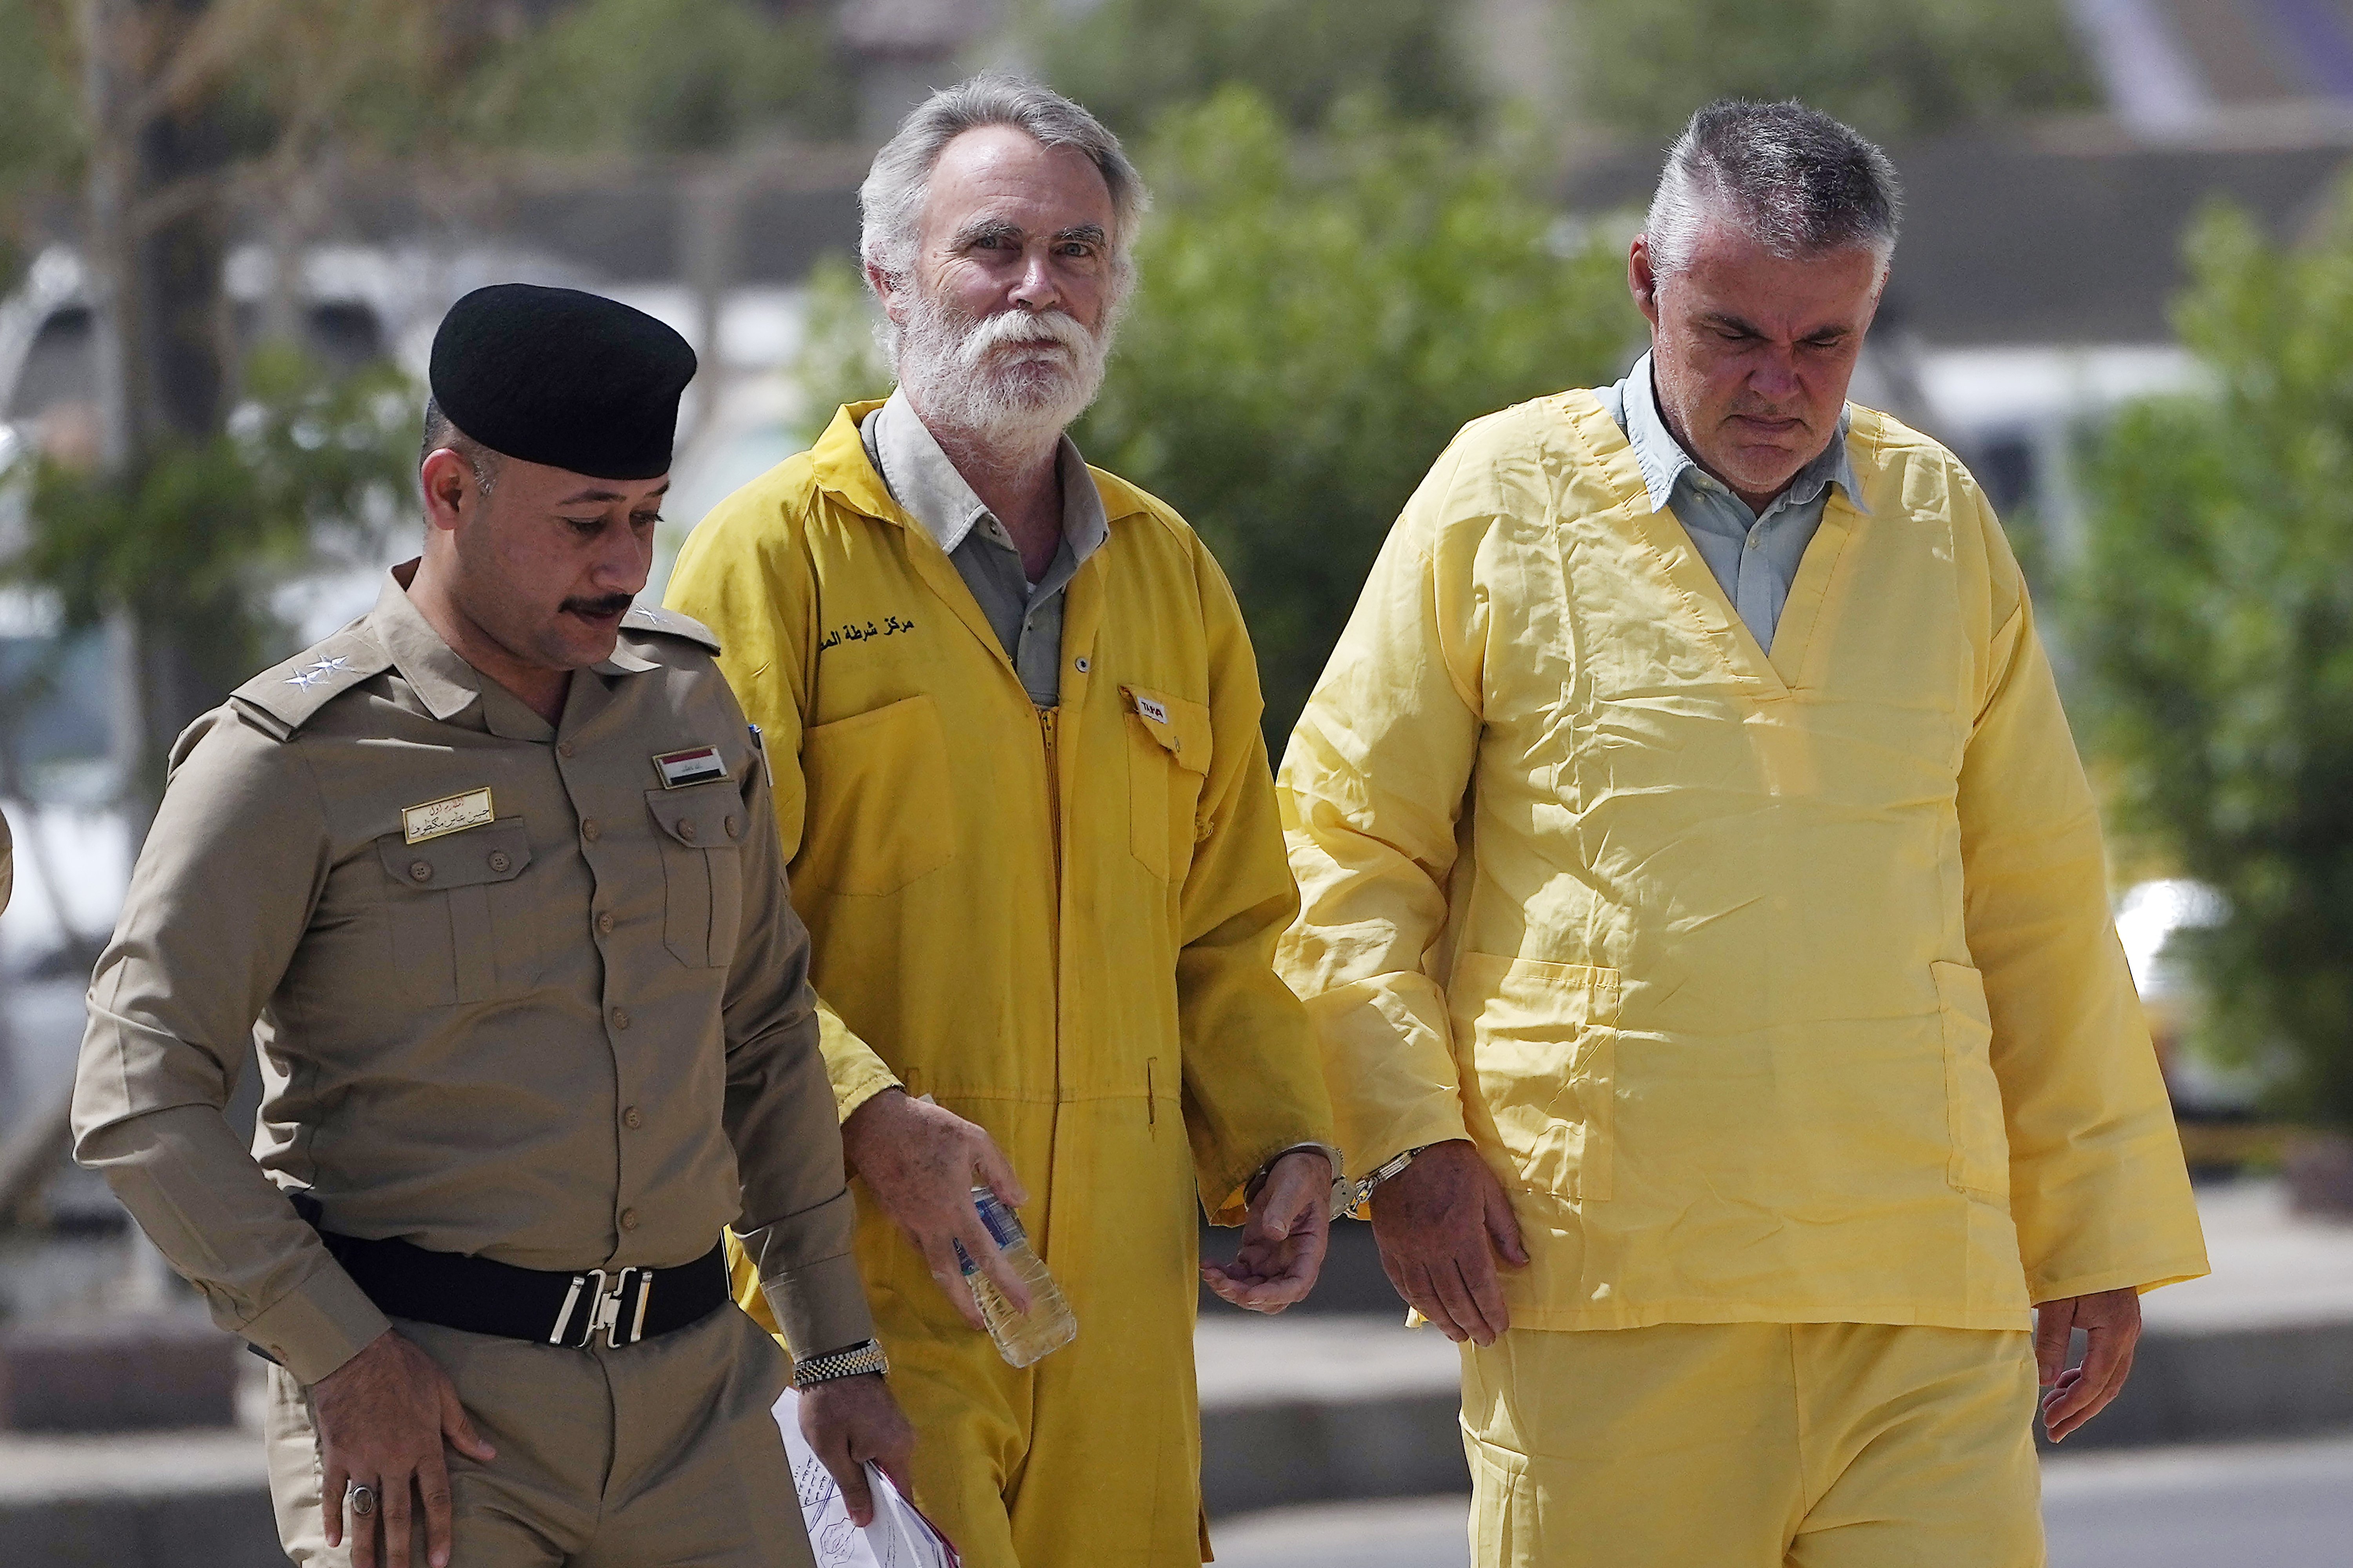 Volker Waldmann (R) and Jim Fitton (C) are handcuffed as they walk to a courtroom escorted by police arriving to court in Baghdad, Iraq, May 22, 2022. (AP Photo)